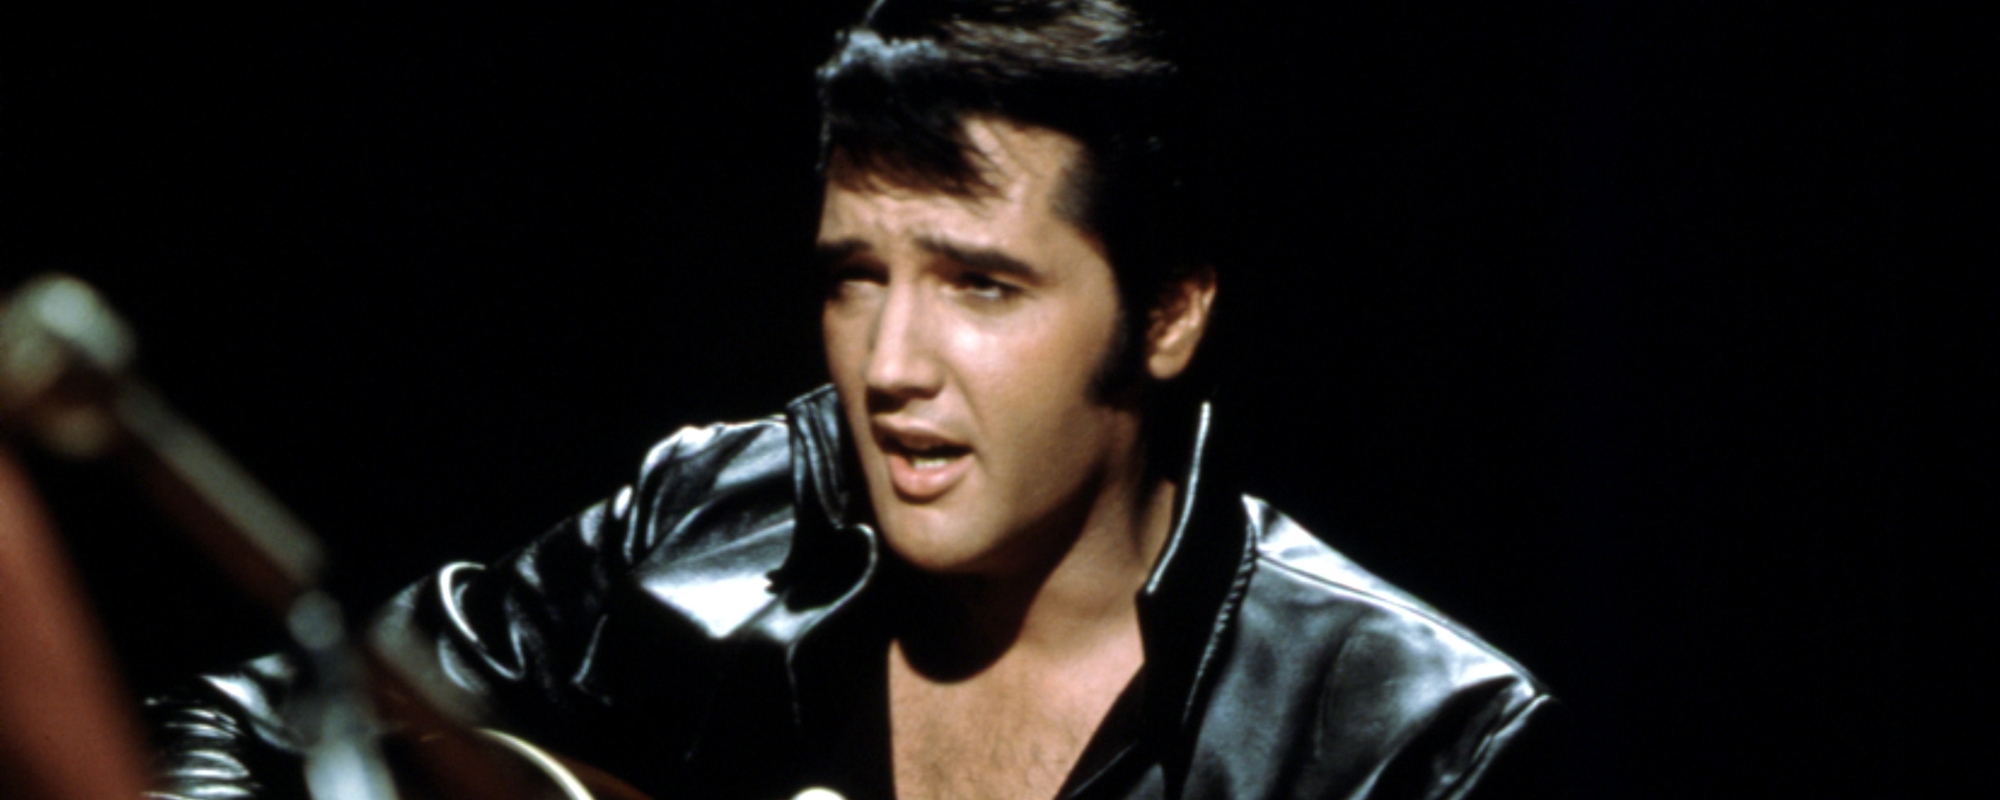 Christmas at Graceland: International Elvis Presley Fans Want to Watch, but Can’t and Speak out